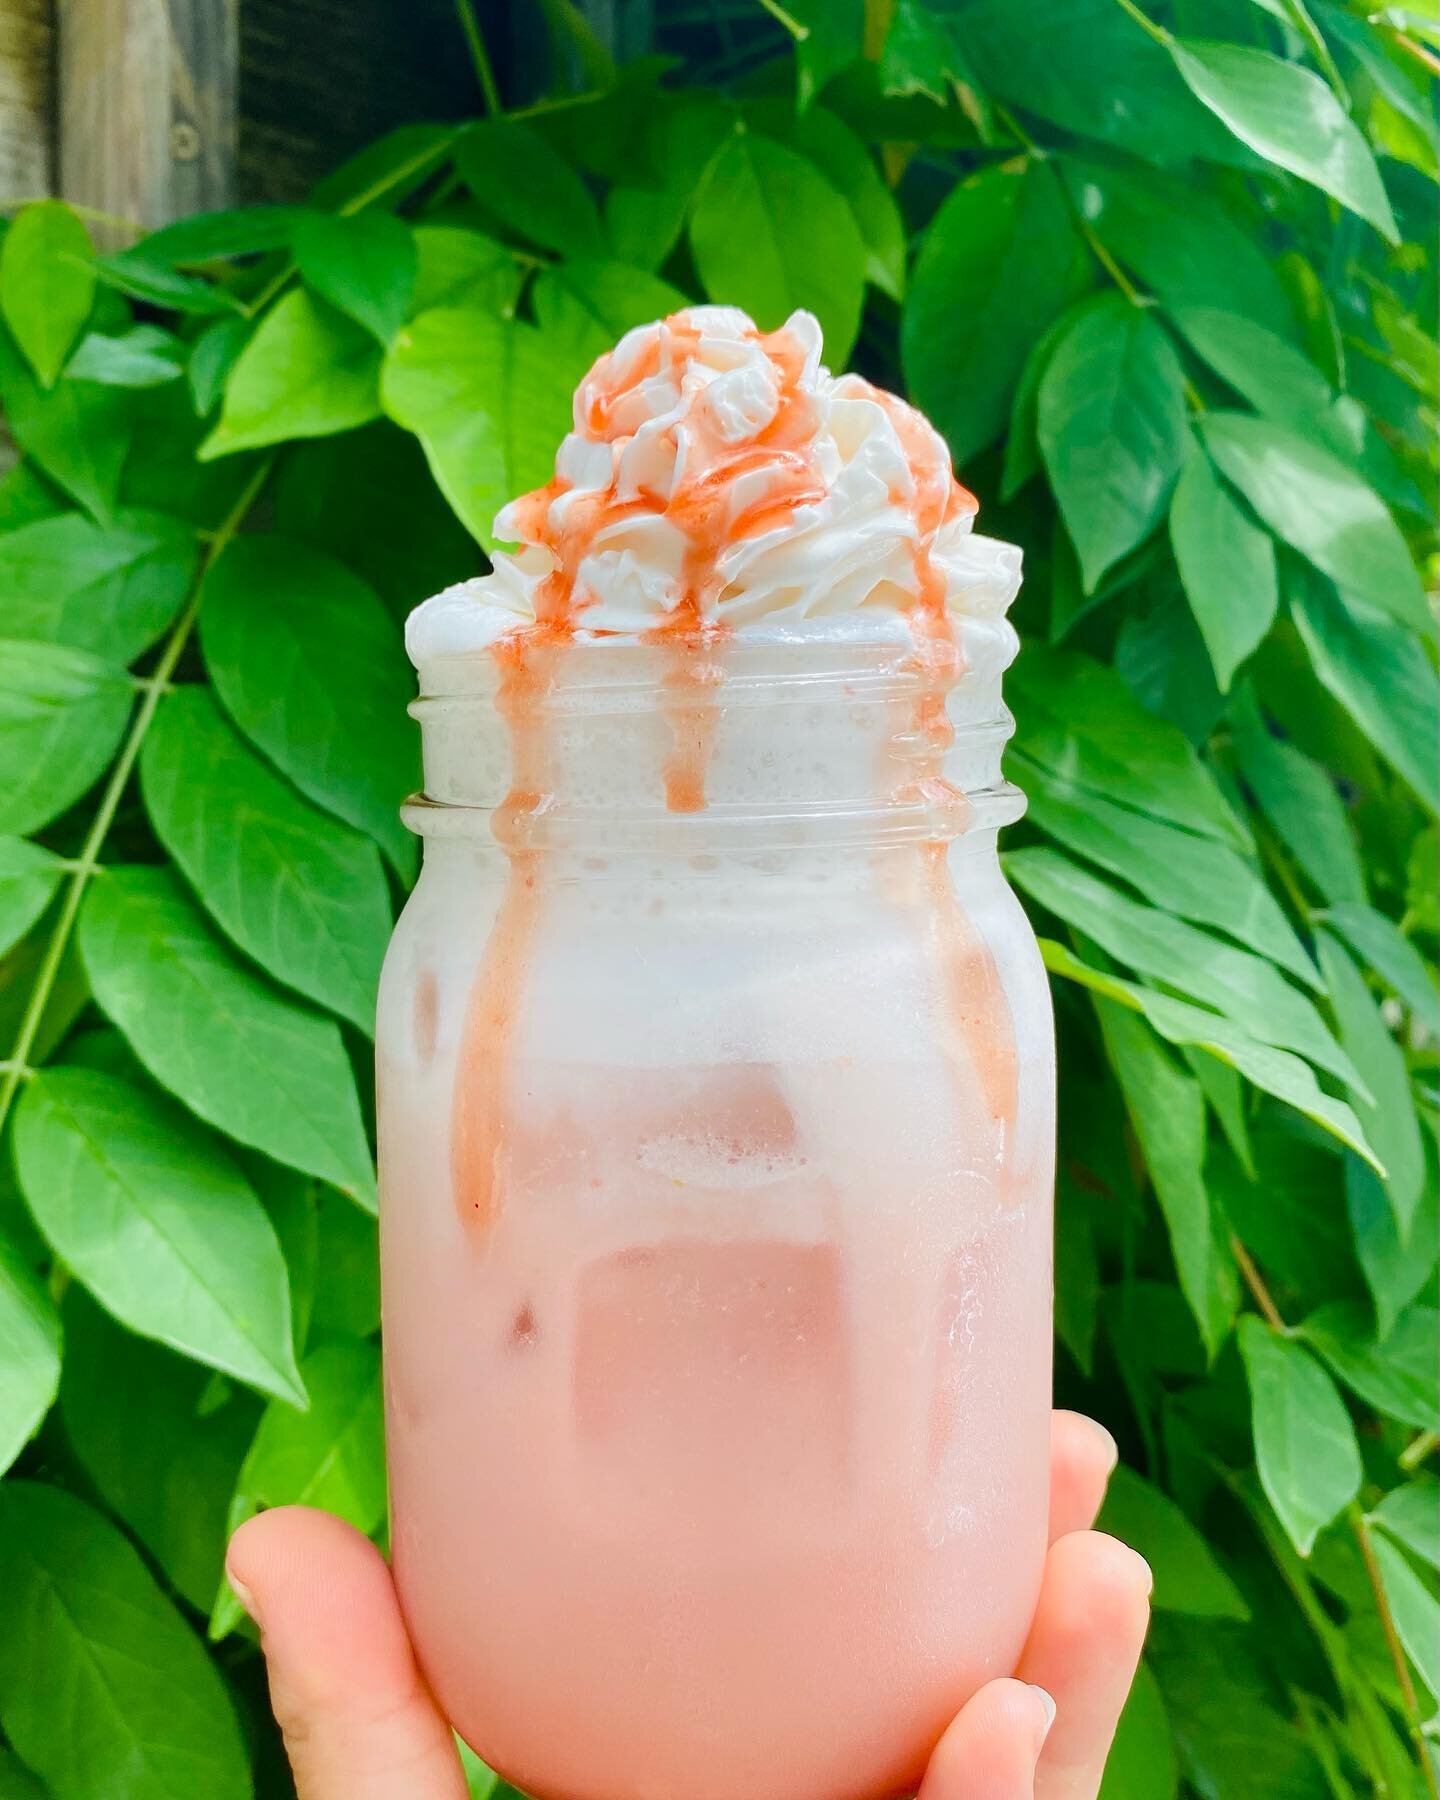 The perfect way to satisfy your sweet tooth right here. STRAWBERRIES &amp; CREAM COOLER! 🍓🌸&hearts;️ On special in Avon today. Homemade strawberry syrup, agave nectar, cold-steamed plant milk, whipped cream over ice. YUM.